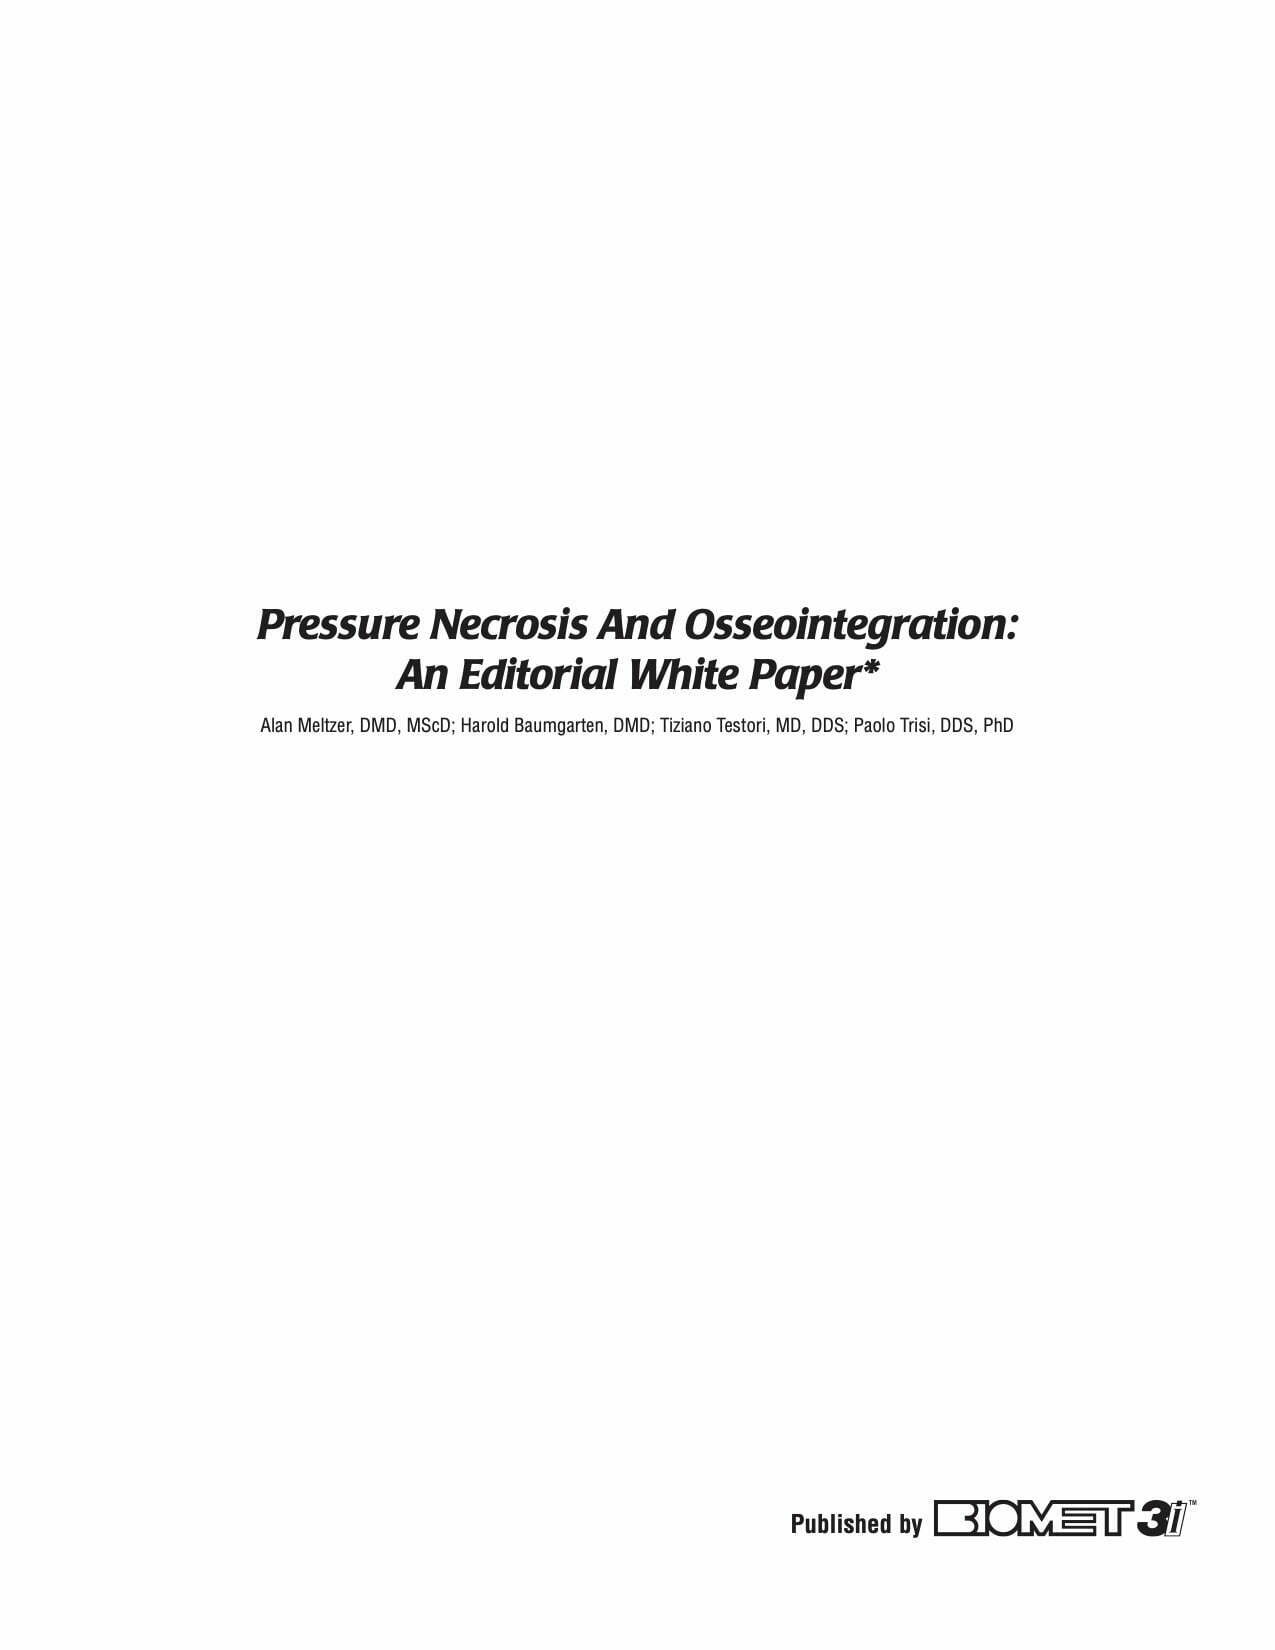 Pressure Necrosis And Osseointegration: An Editorial White Paper